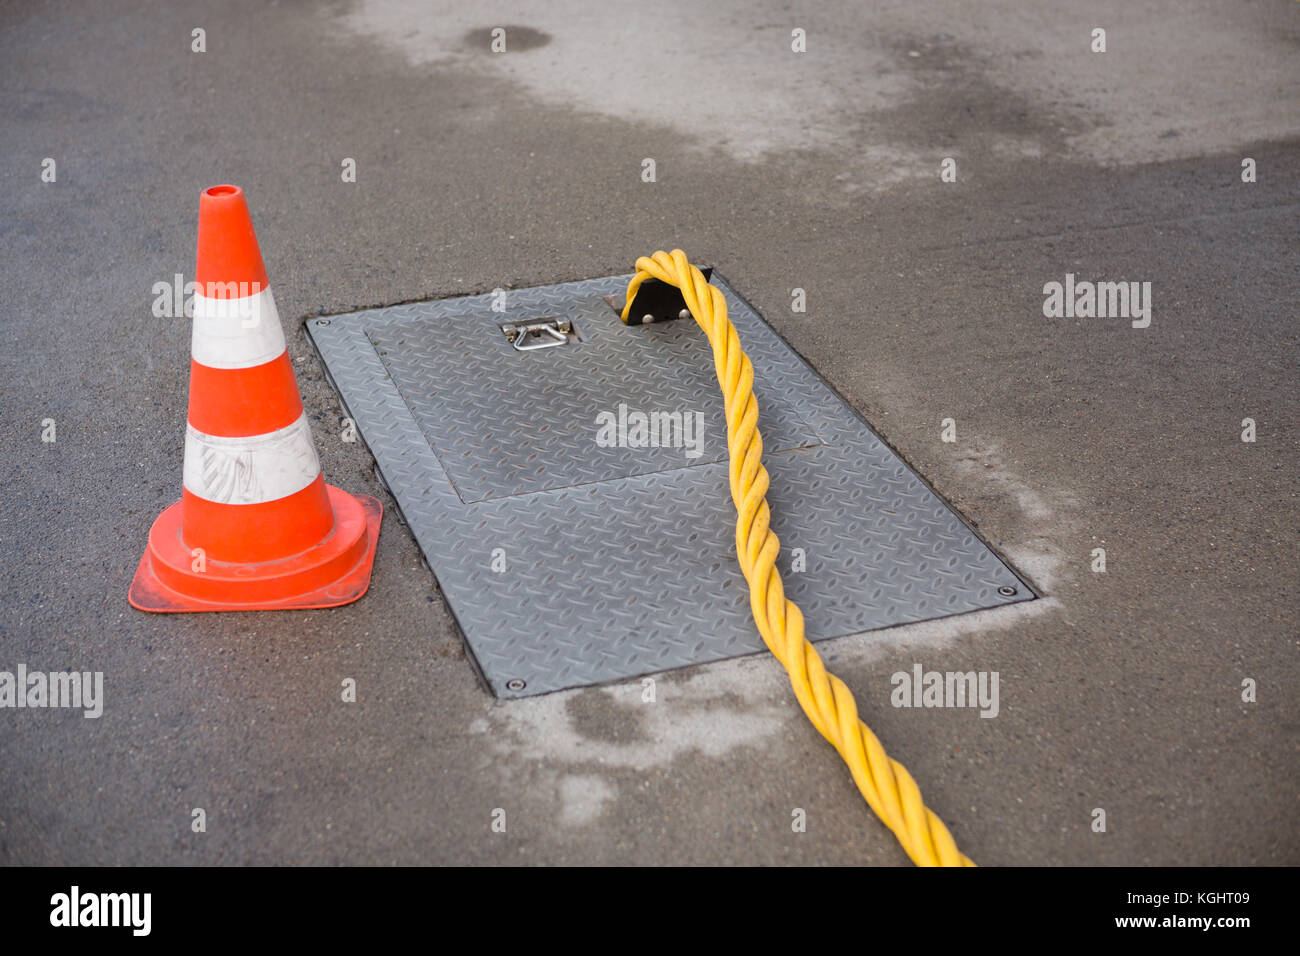 Ground Power Pipe And Traffic Cone At Airport Stock Photo